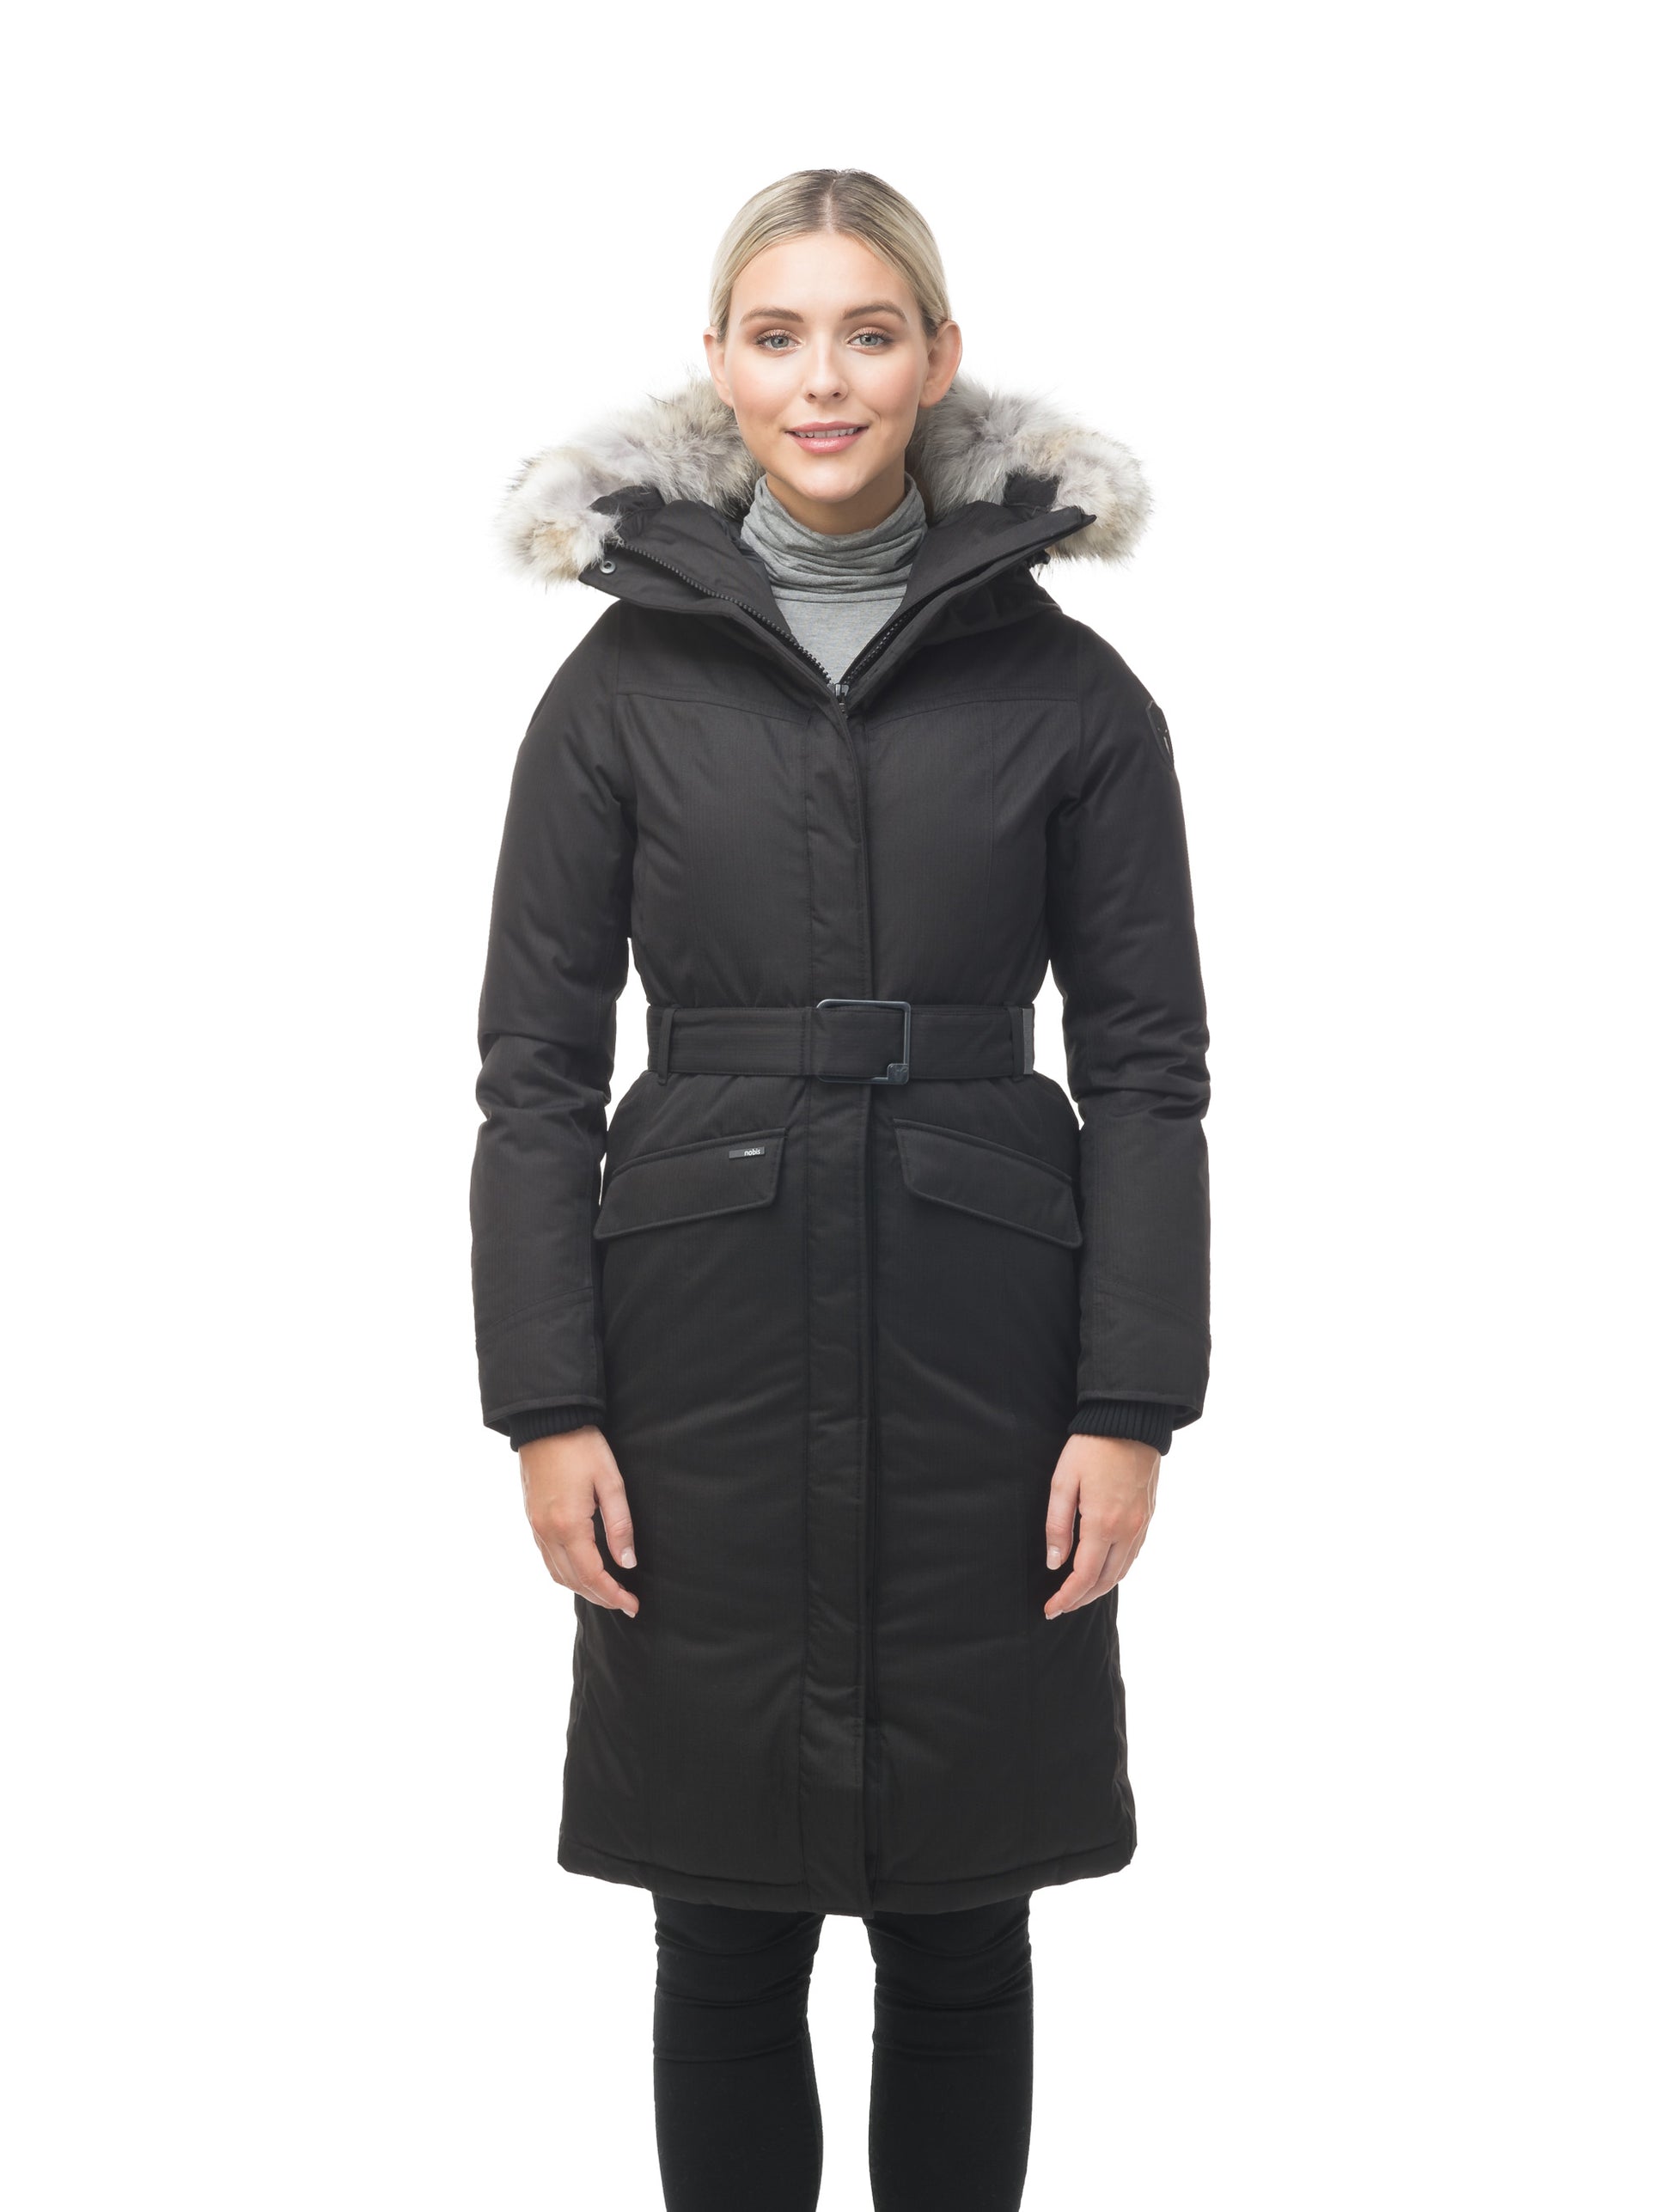 Women's maxi down filled parka with calf length hem in CH Black